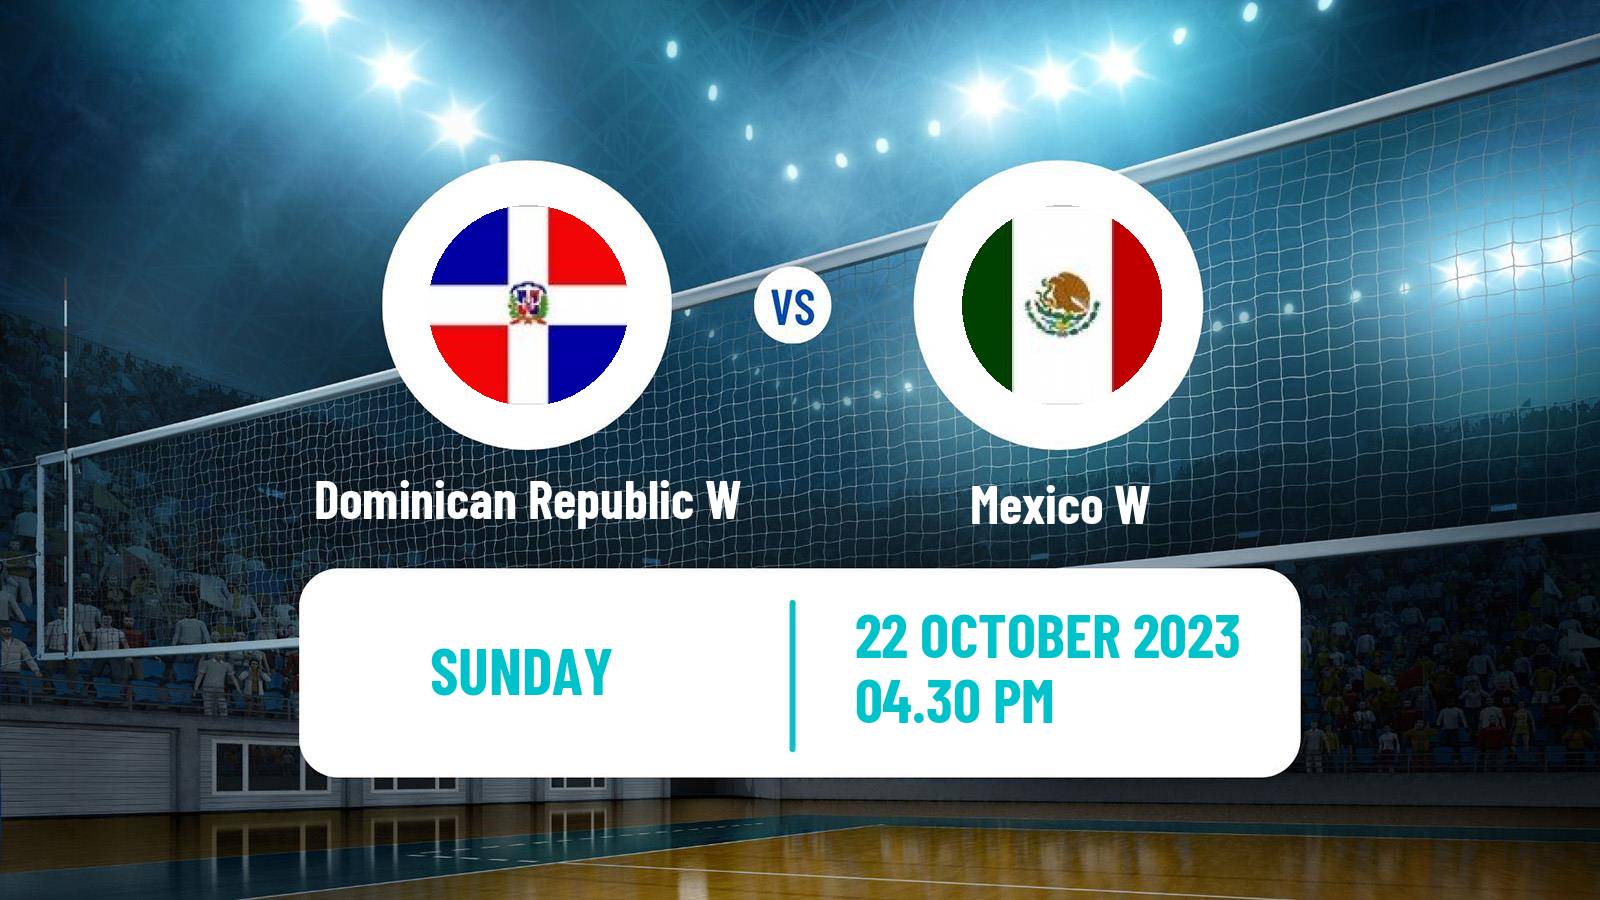 Volleyball Pan American Games Volleyball Women Dominican Republic W - Mexico W